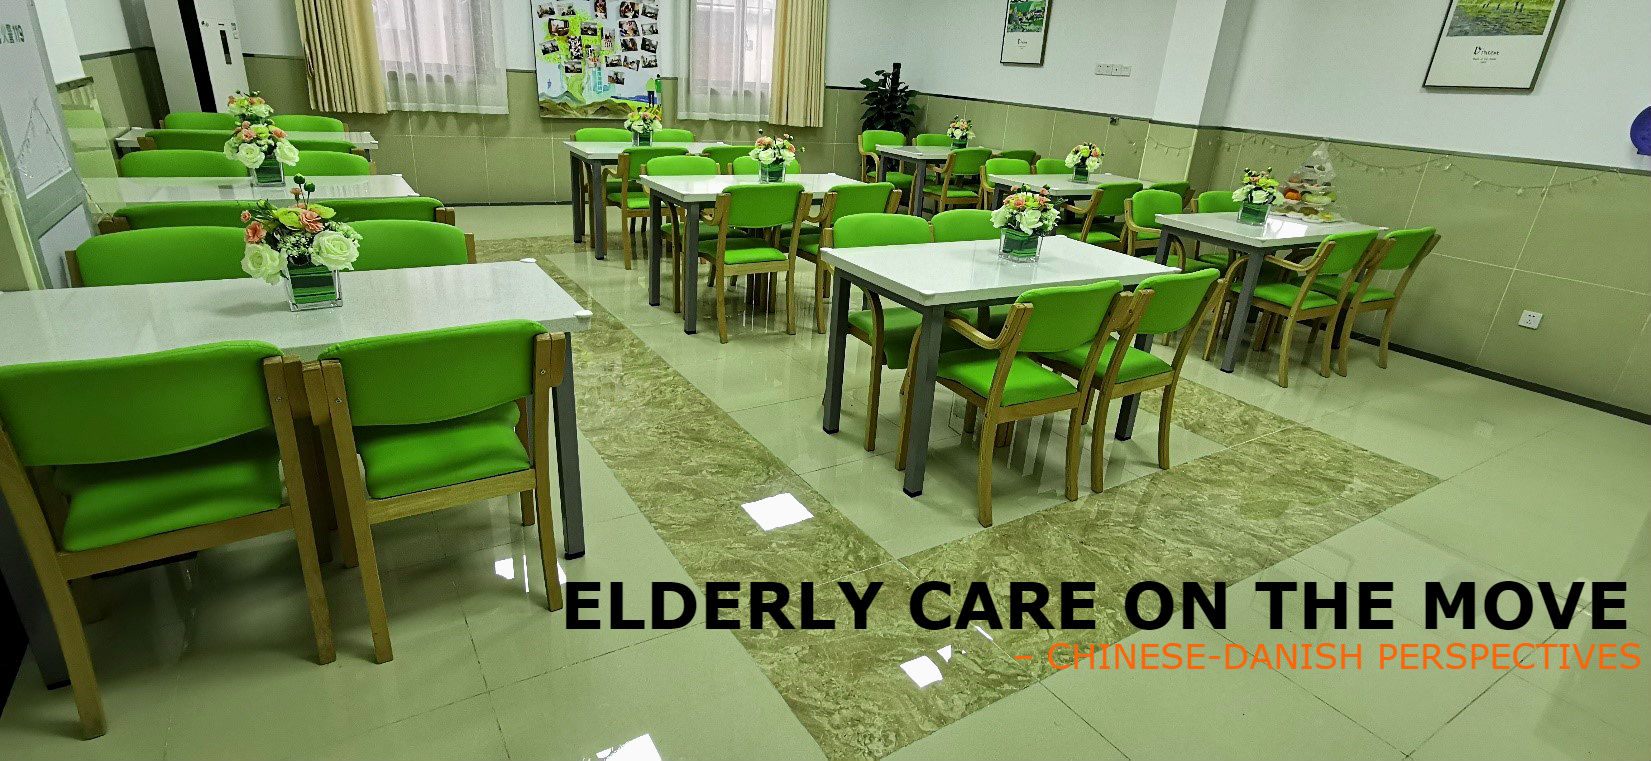 Elderly care on the move image